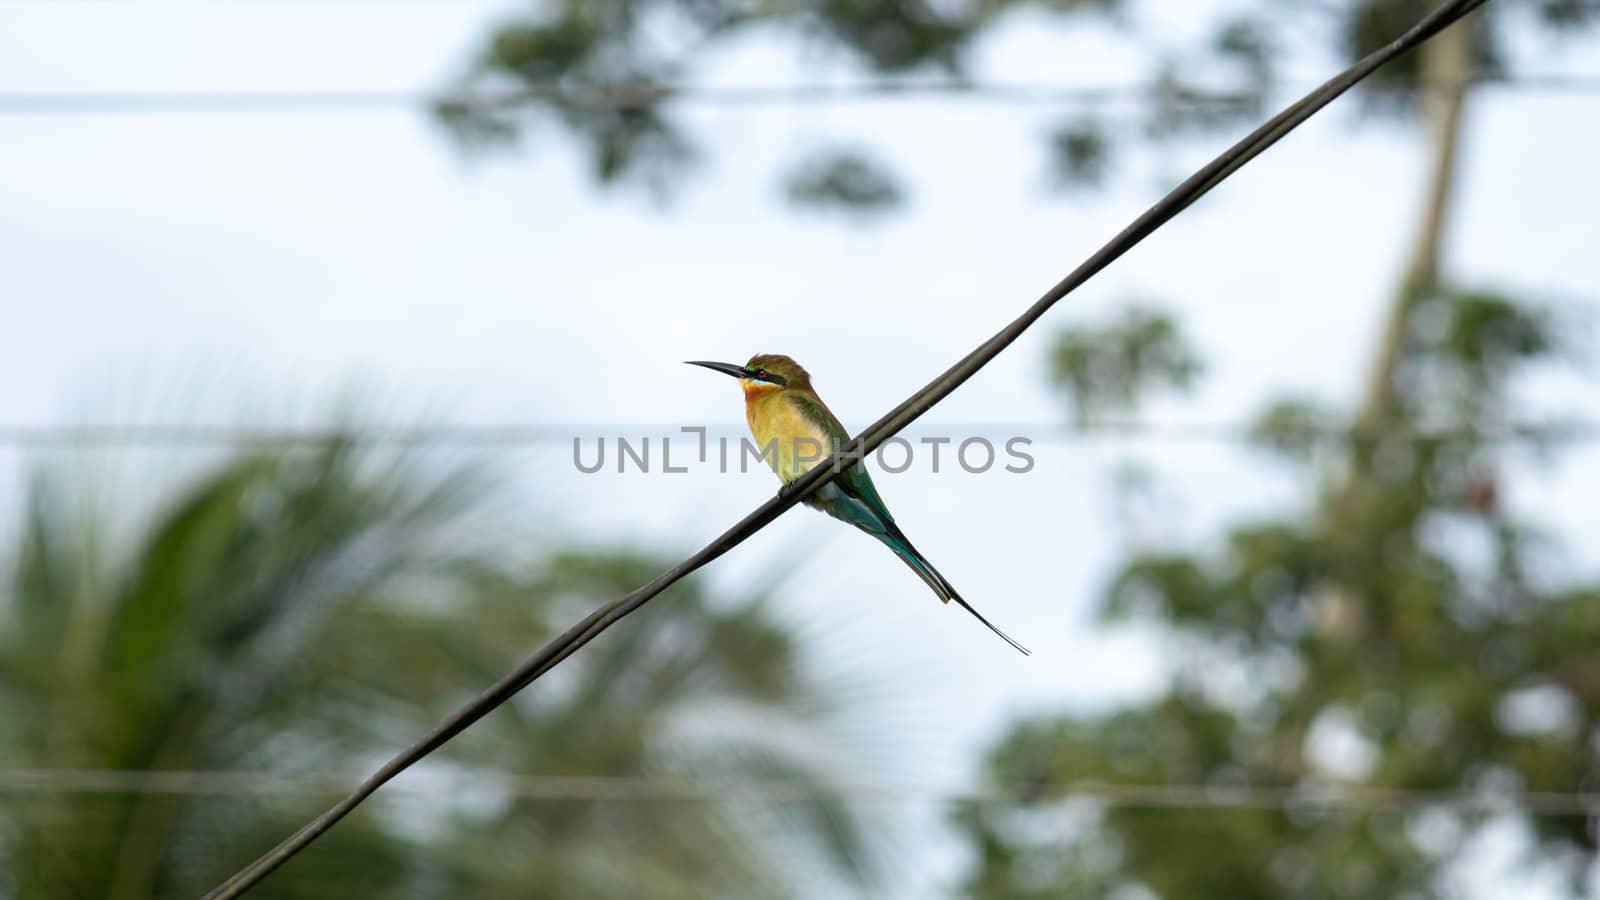 Blue-tailed bee-eater bird perched in a telephone cable by nilanka